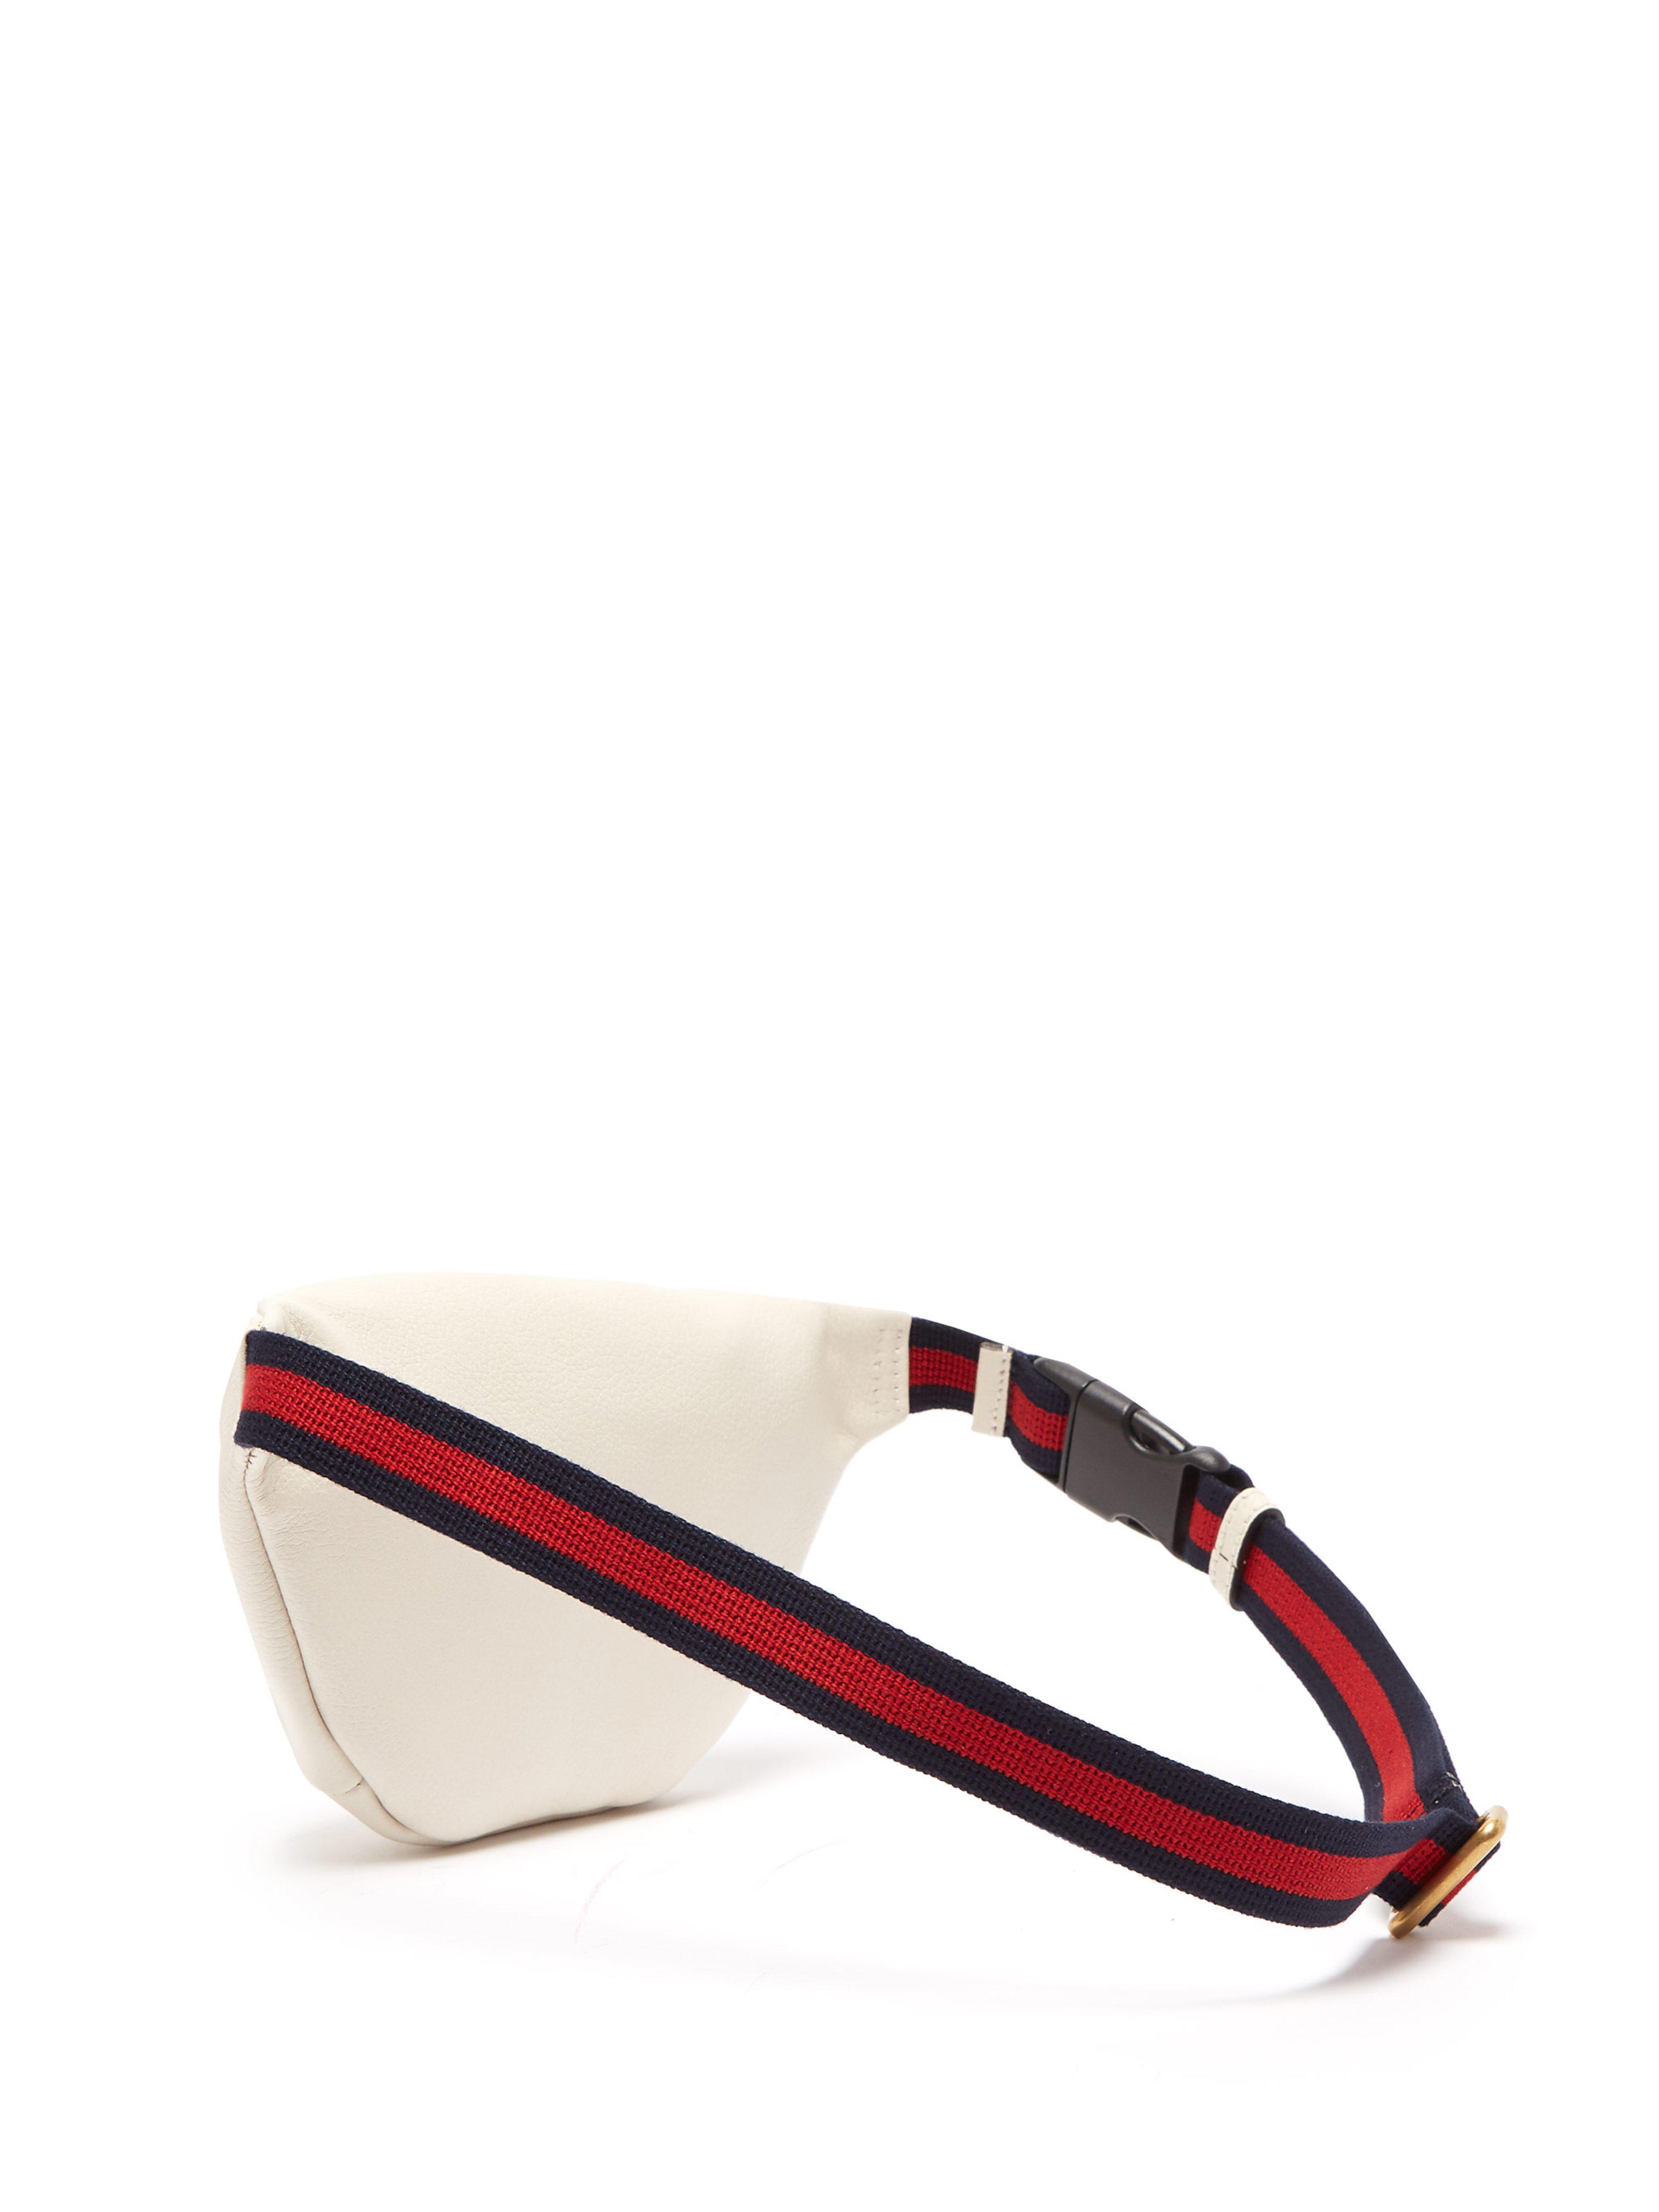 Gucci Small Logo Print Leather Belt Bag in White for Men - Lyst